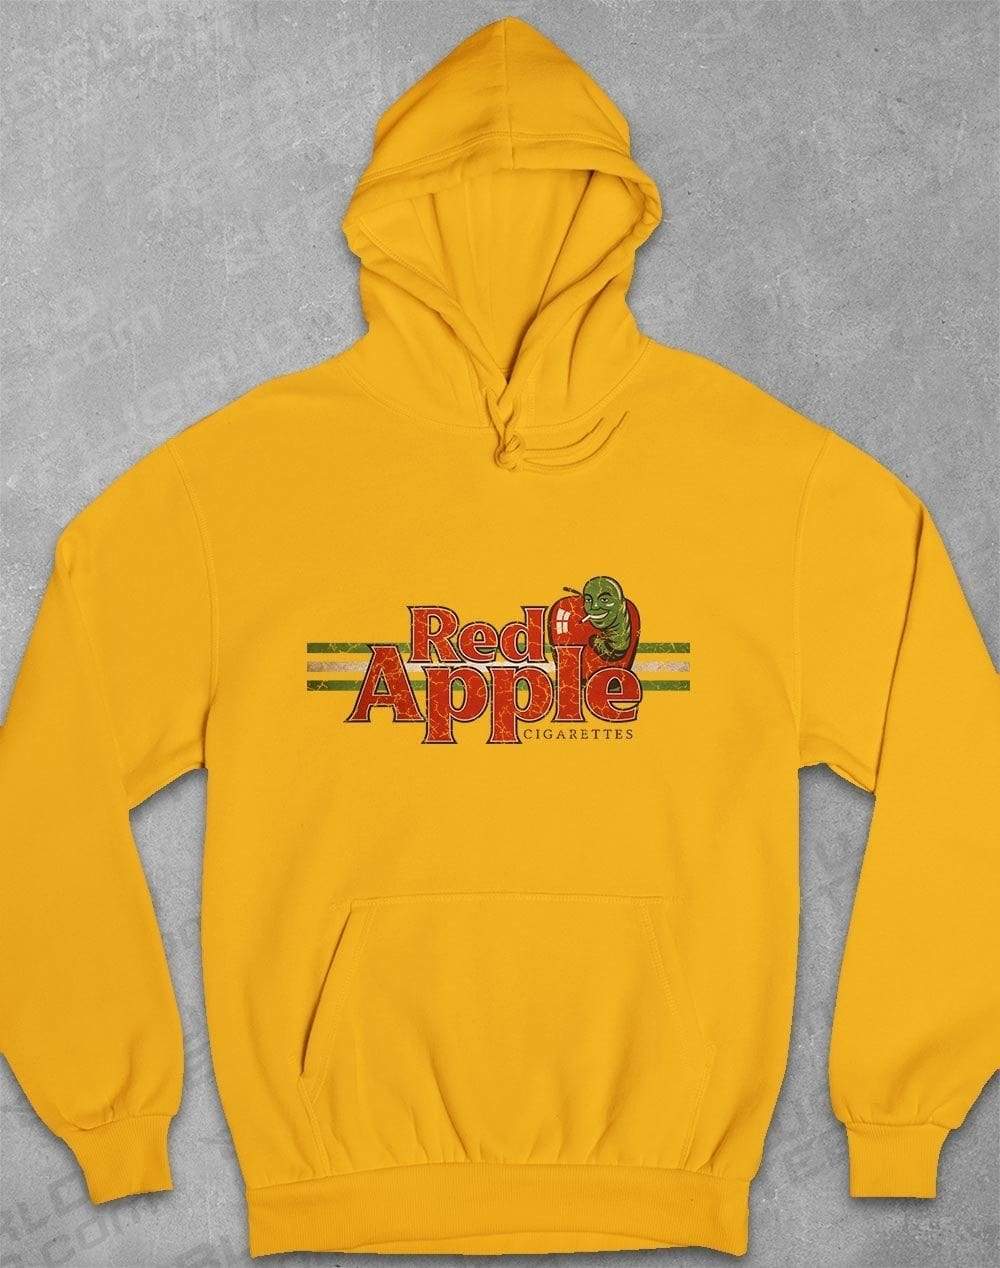 Red Apple Cigarettes Hoodie S / Gold  - Off World Tees